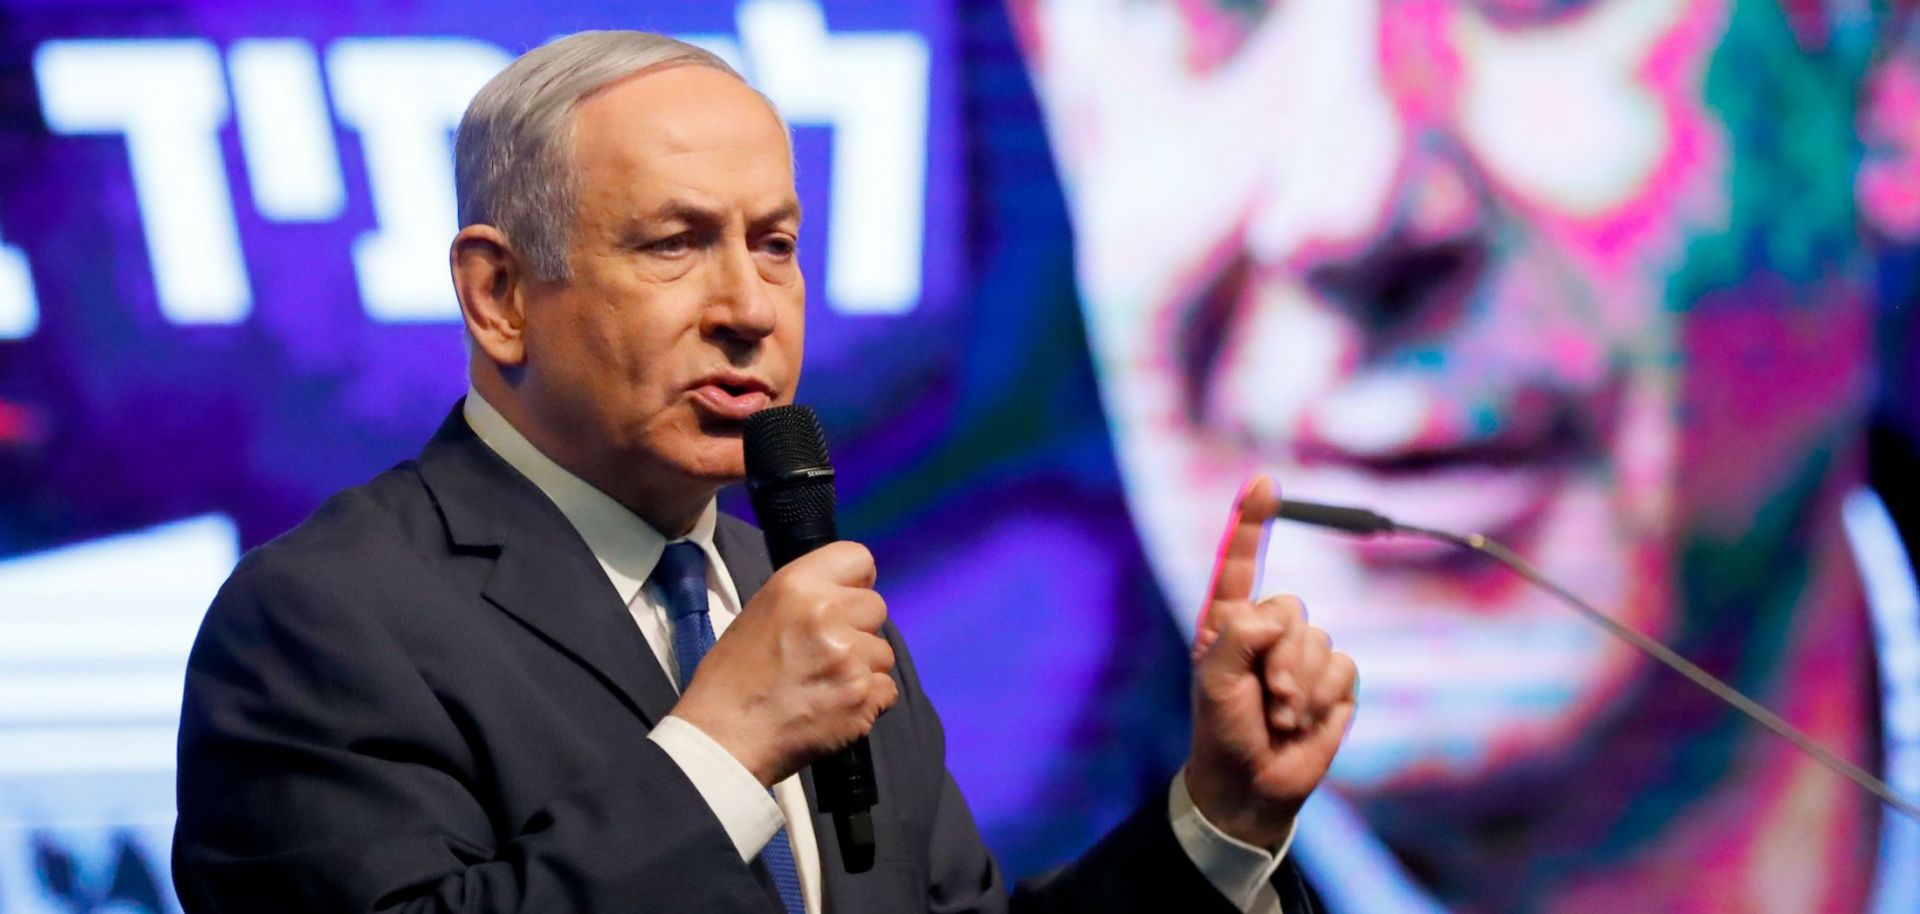 Israeli Prime Minister Benjamin Netanyahu addresses Likud party supporters during a Feb. 29, 2020, political rally in Ramat Gan.